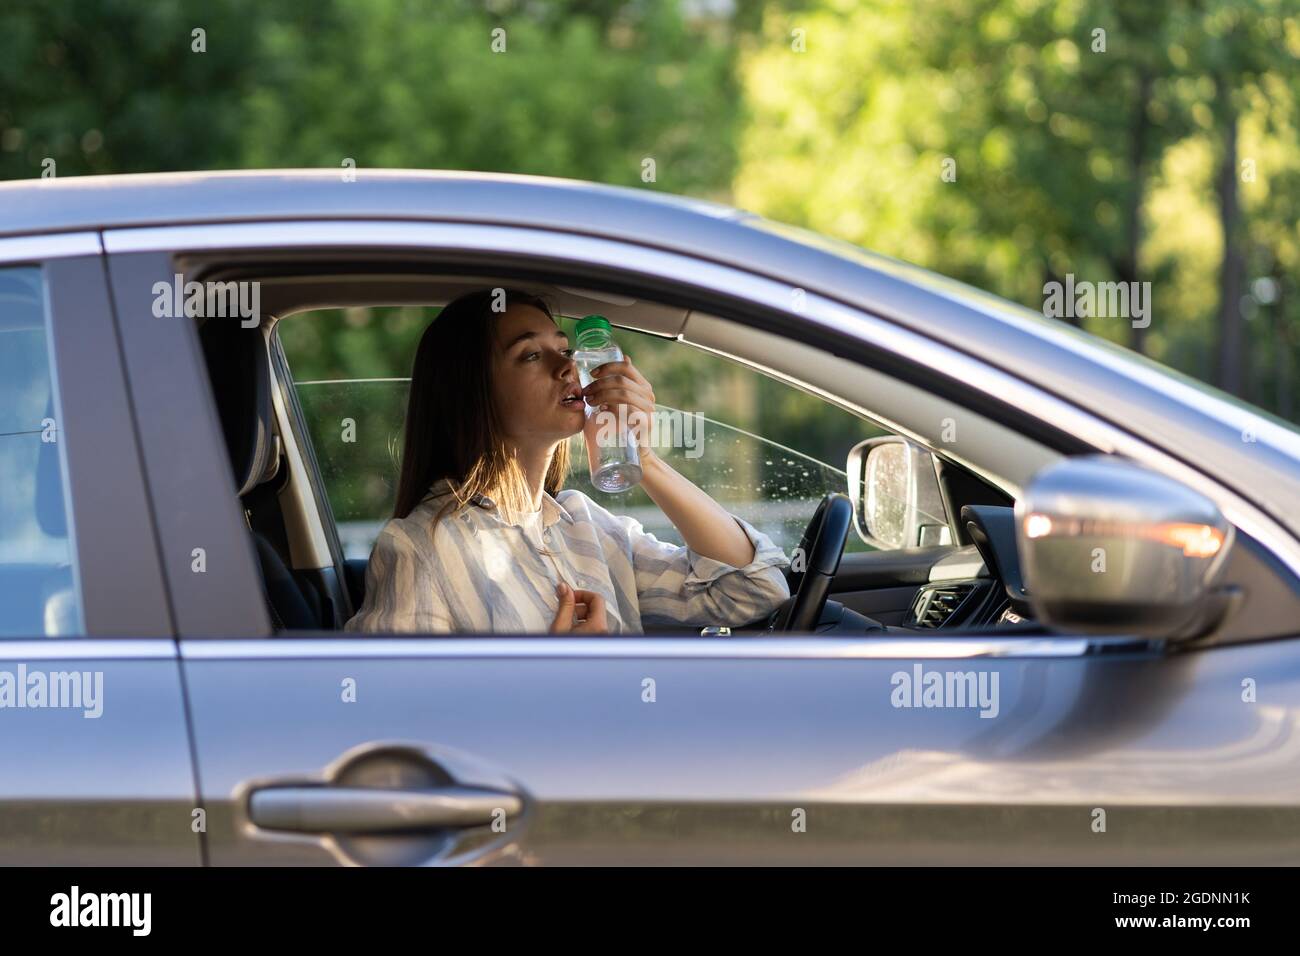 Exhausted girl driver suffering from headache, heat, hot weather applies bottle of water to forehead Stock Photo